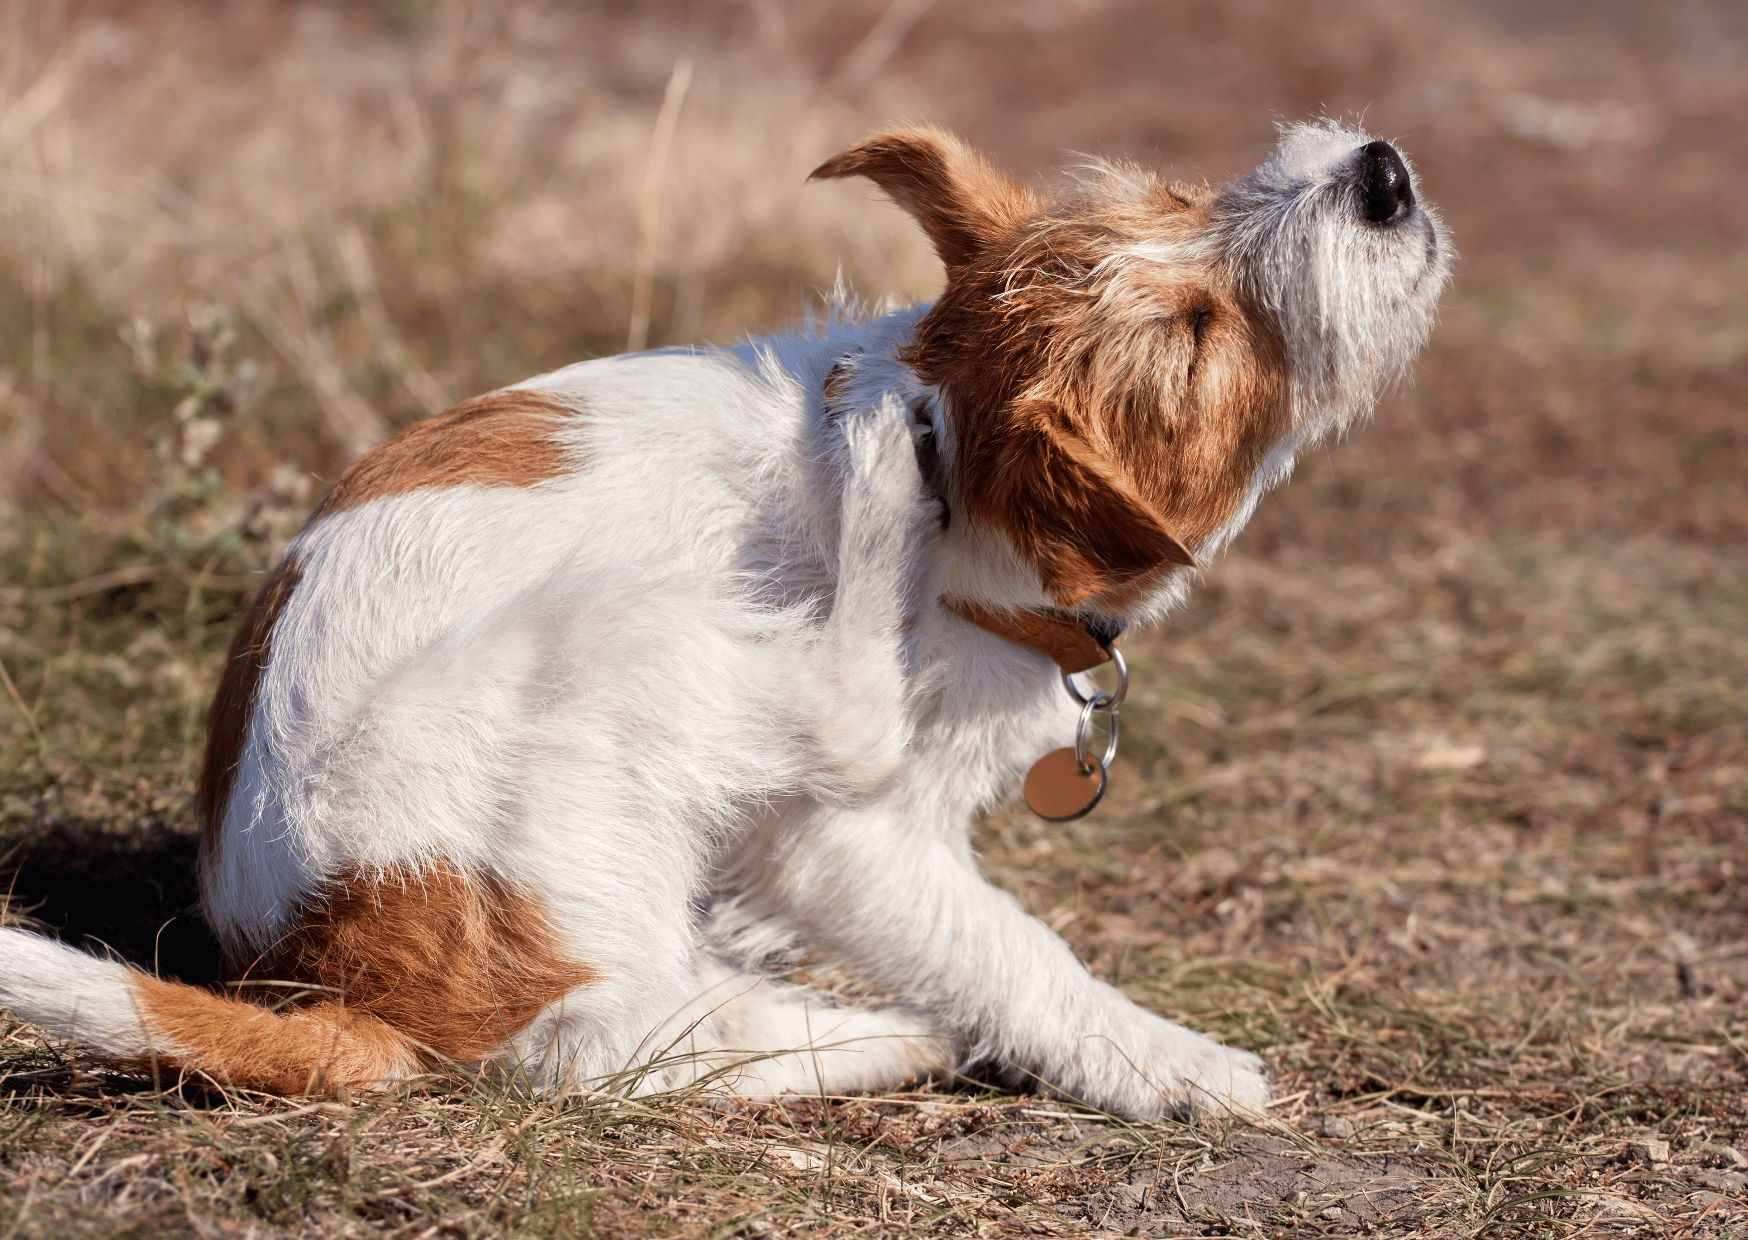 Why Does My Dog Keep Scratching? Dr. Chen Yilun Offers Tips for Daily Skin Care for Your Furry Friend!